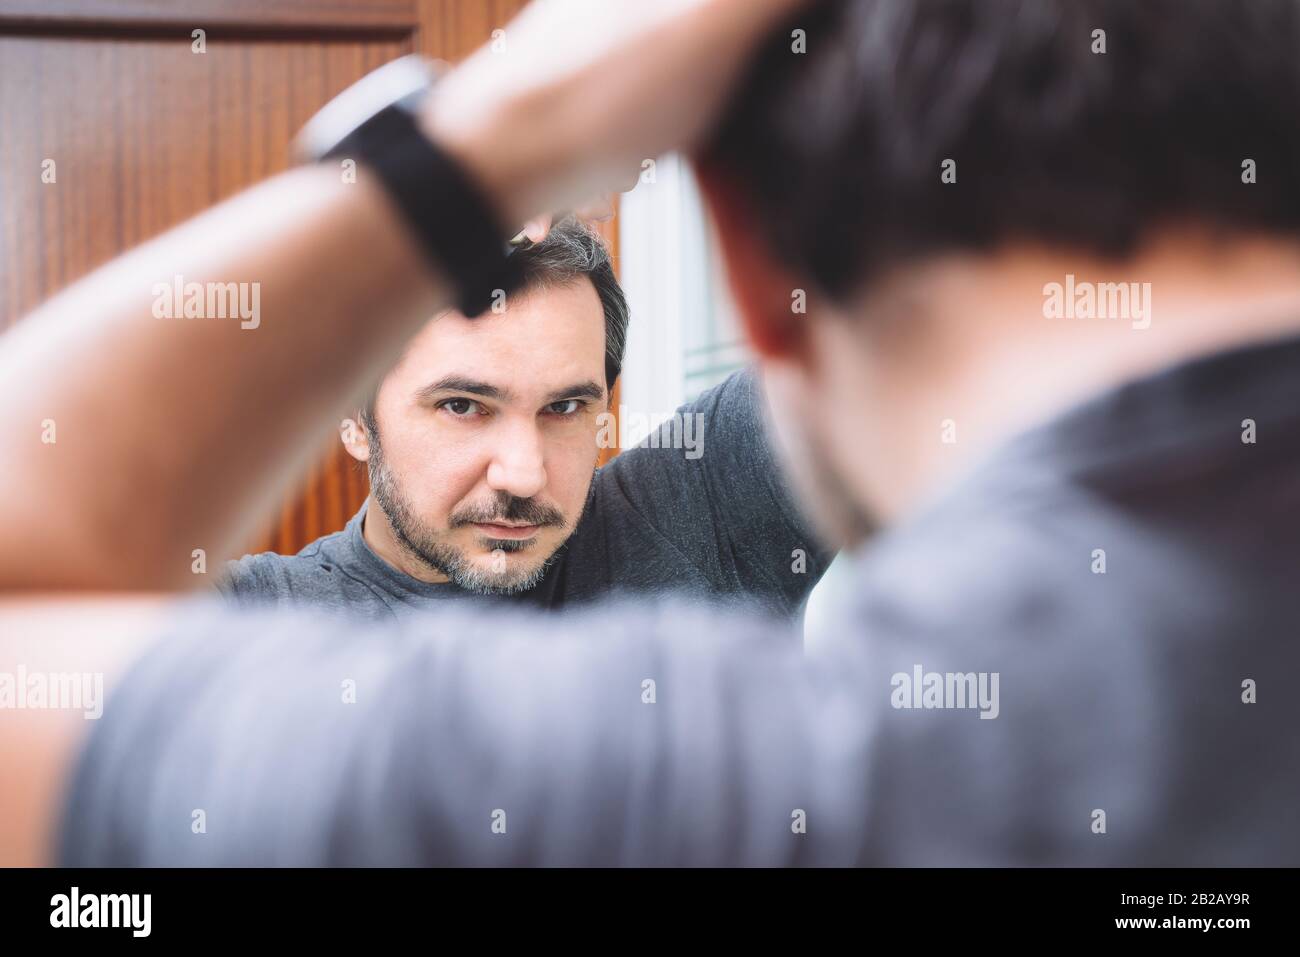 40s Man combing his hair in the bathroom Stock Photo